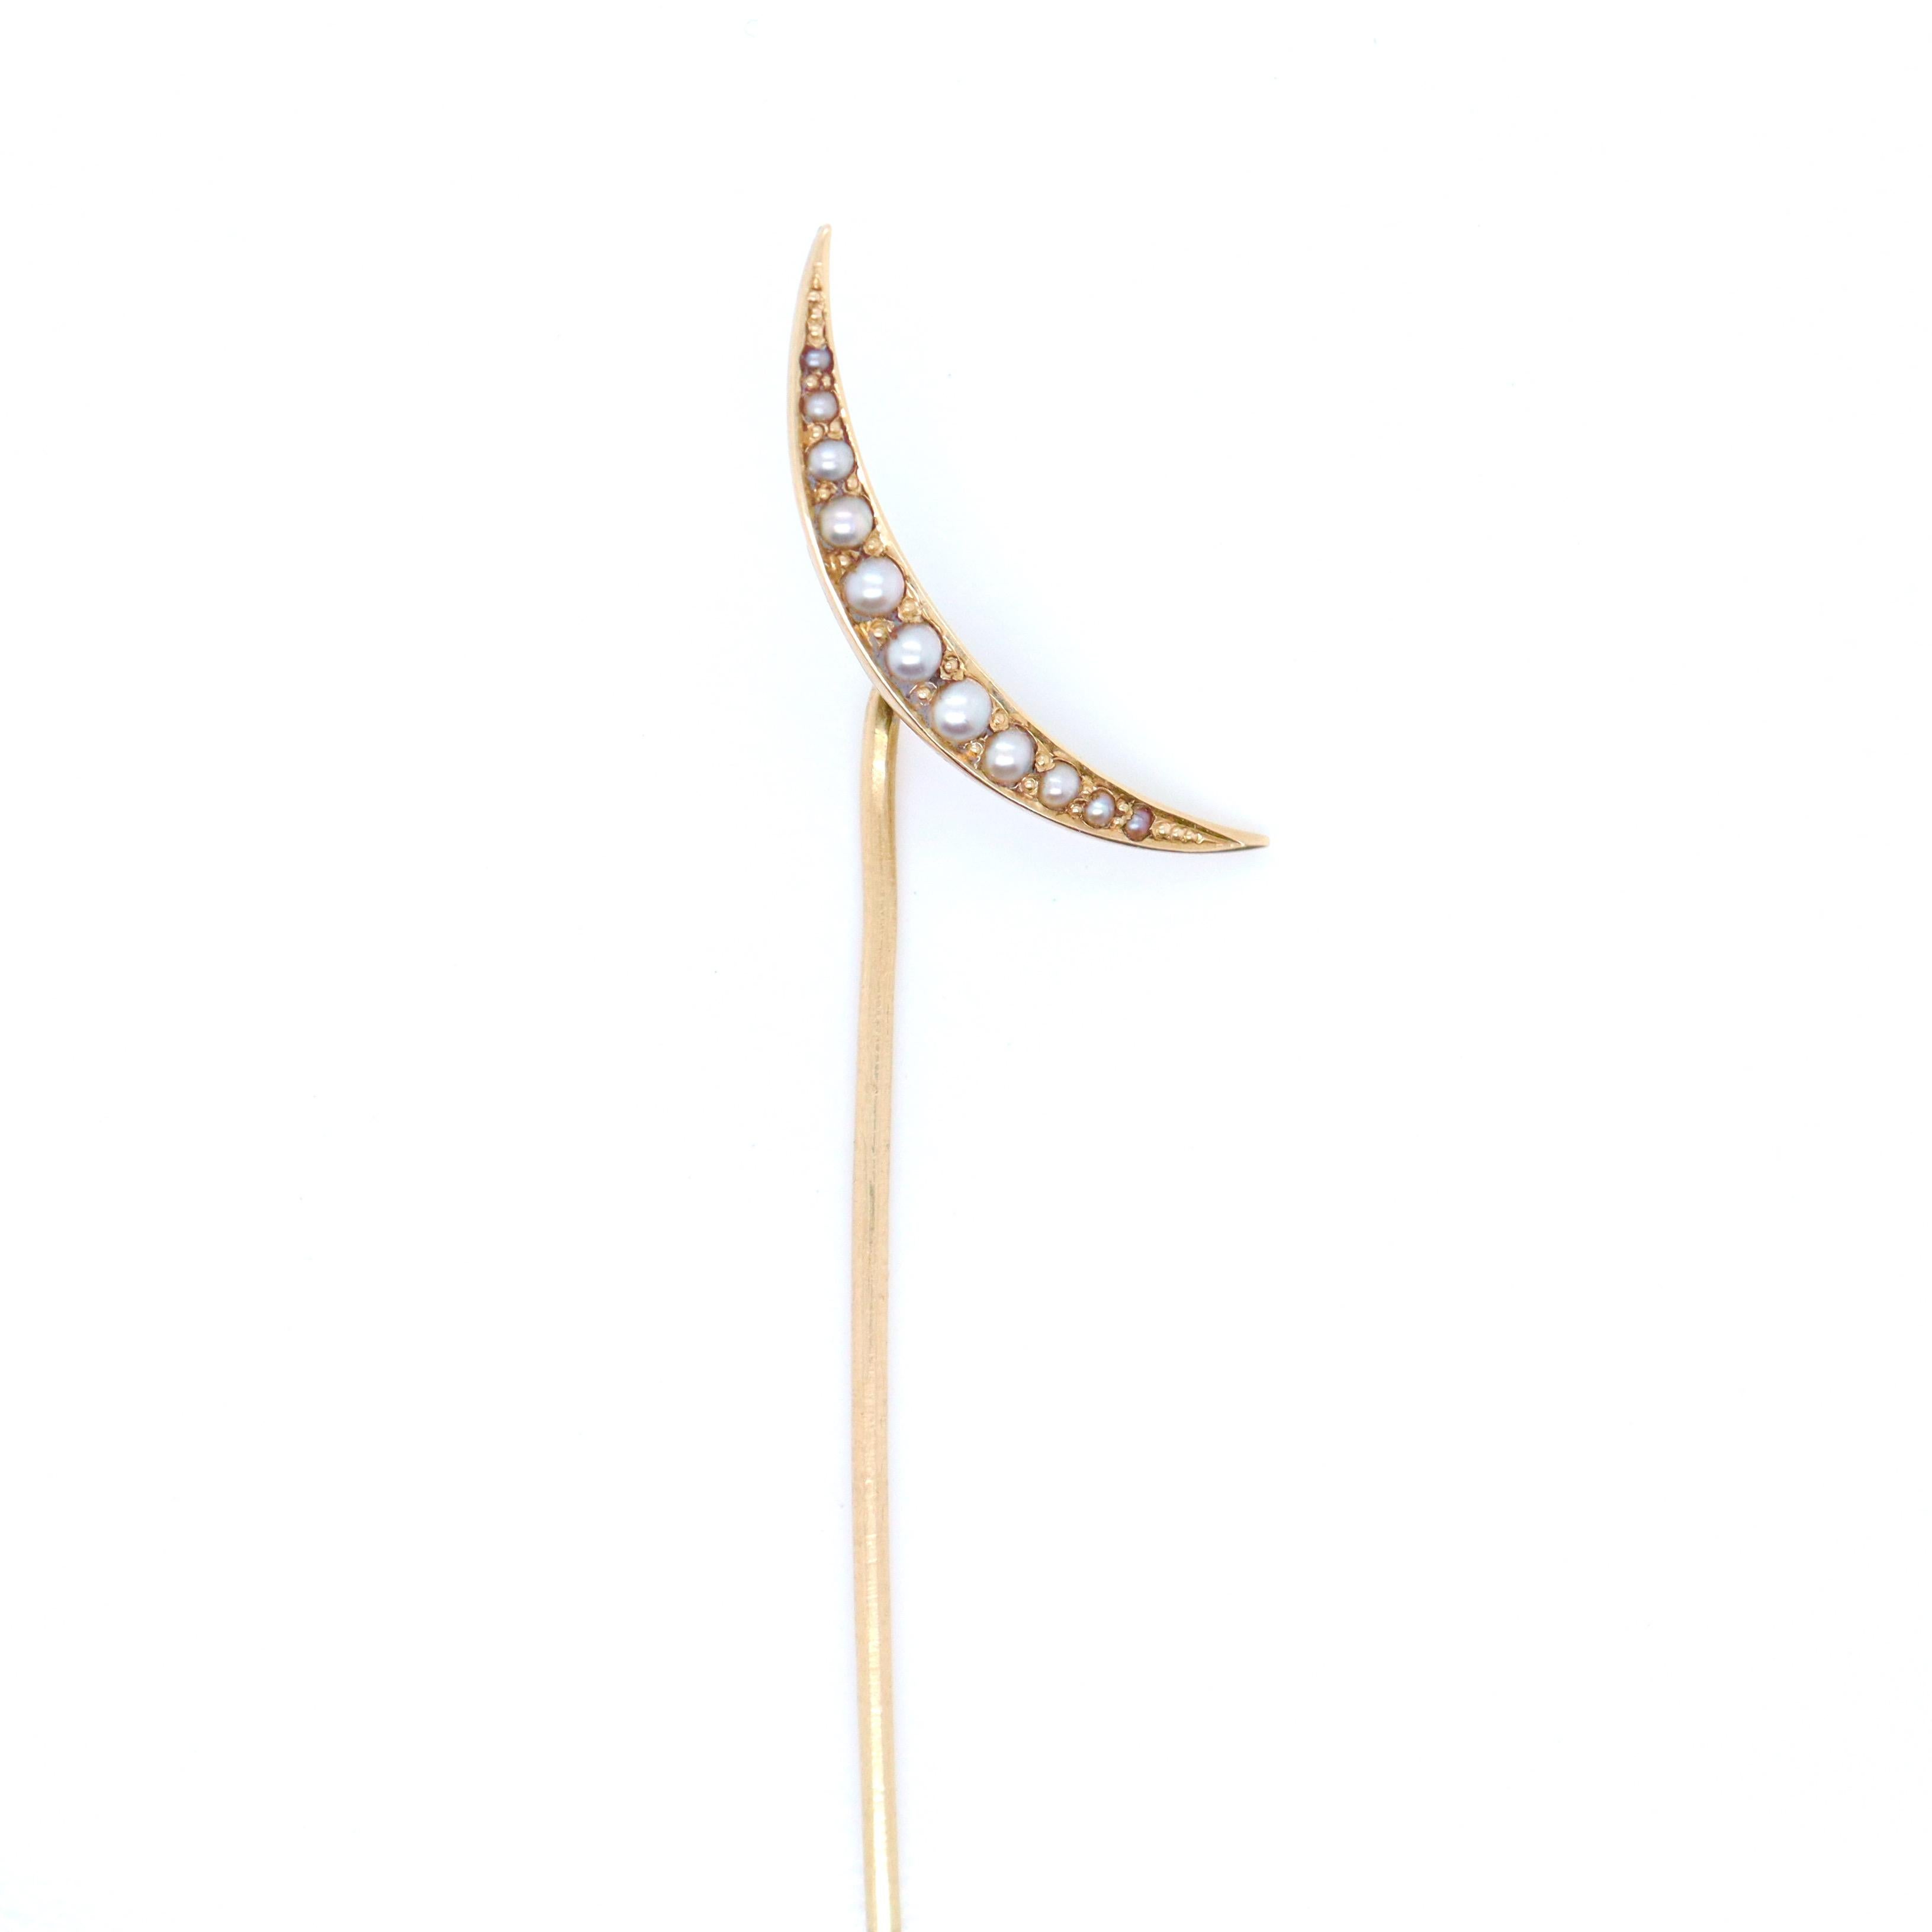 A fine antique gold and pearl pin.

In the form of a crescent moon.

In 14k gold.

Set with 10 small seed pearls.

Marked to the reverse with a cross maker's mark.

Simply a wonderful stick pin!

Date:
20th Century

Overall Condition:
It is in